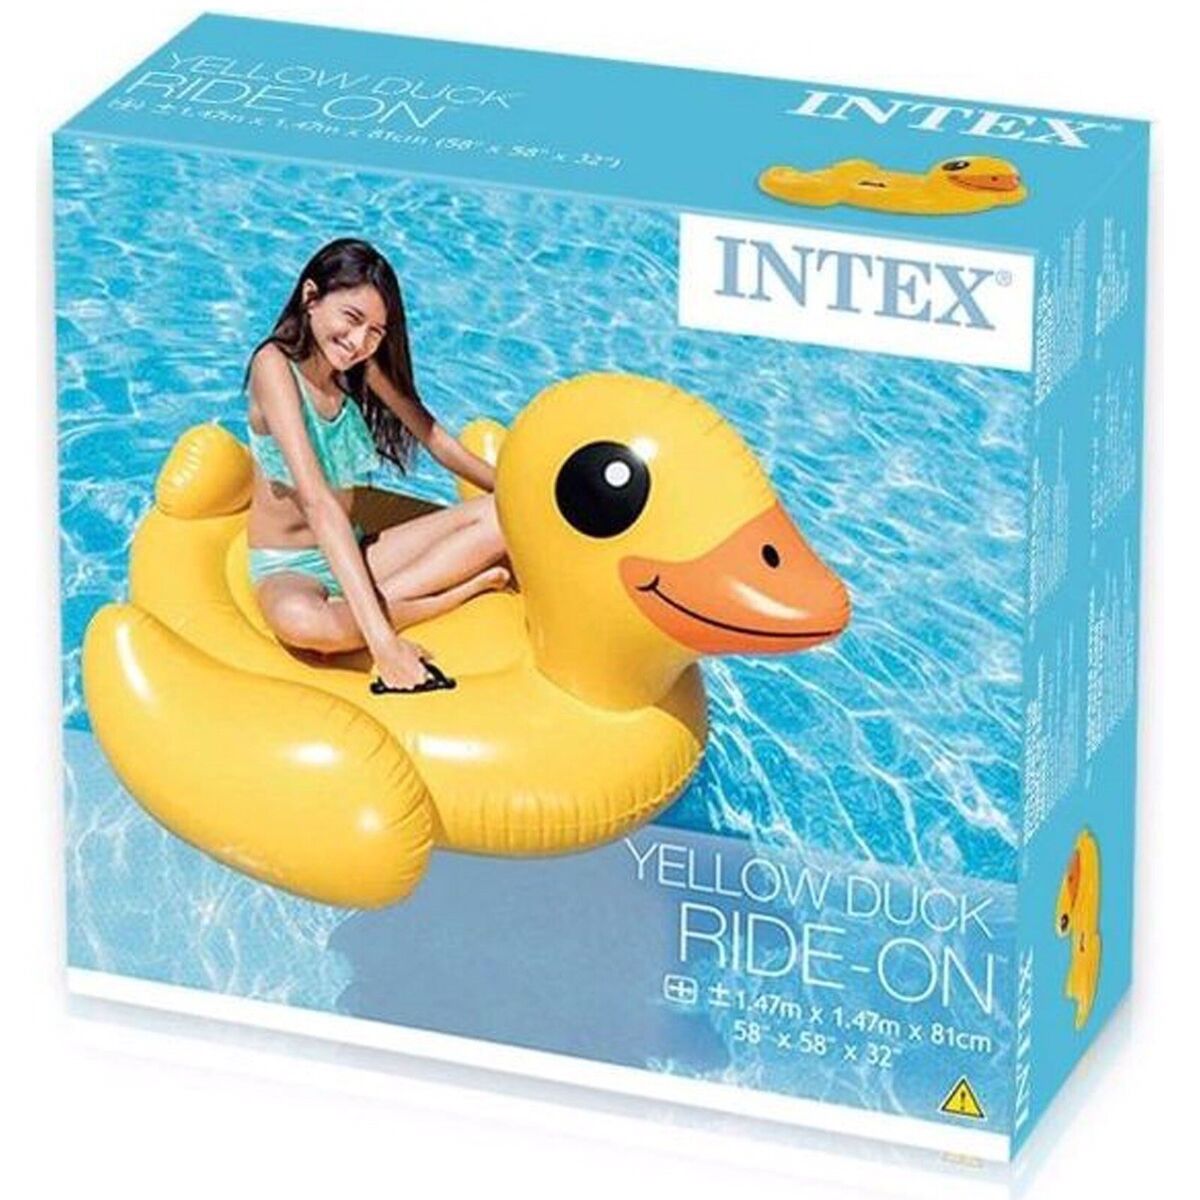 Yellow Duck Inflatable Ride-on